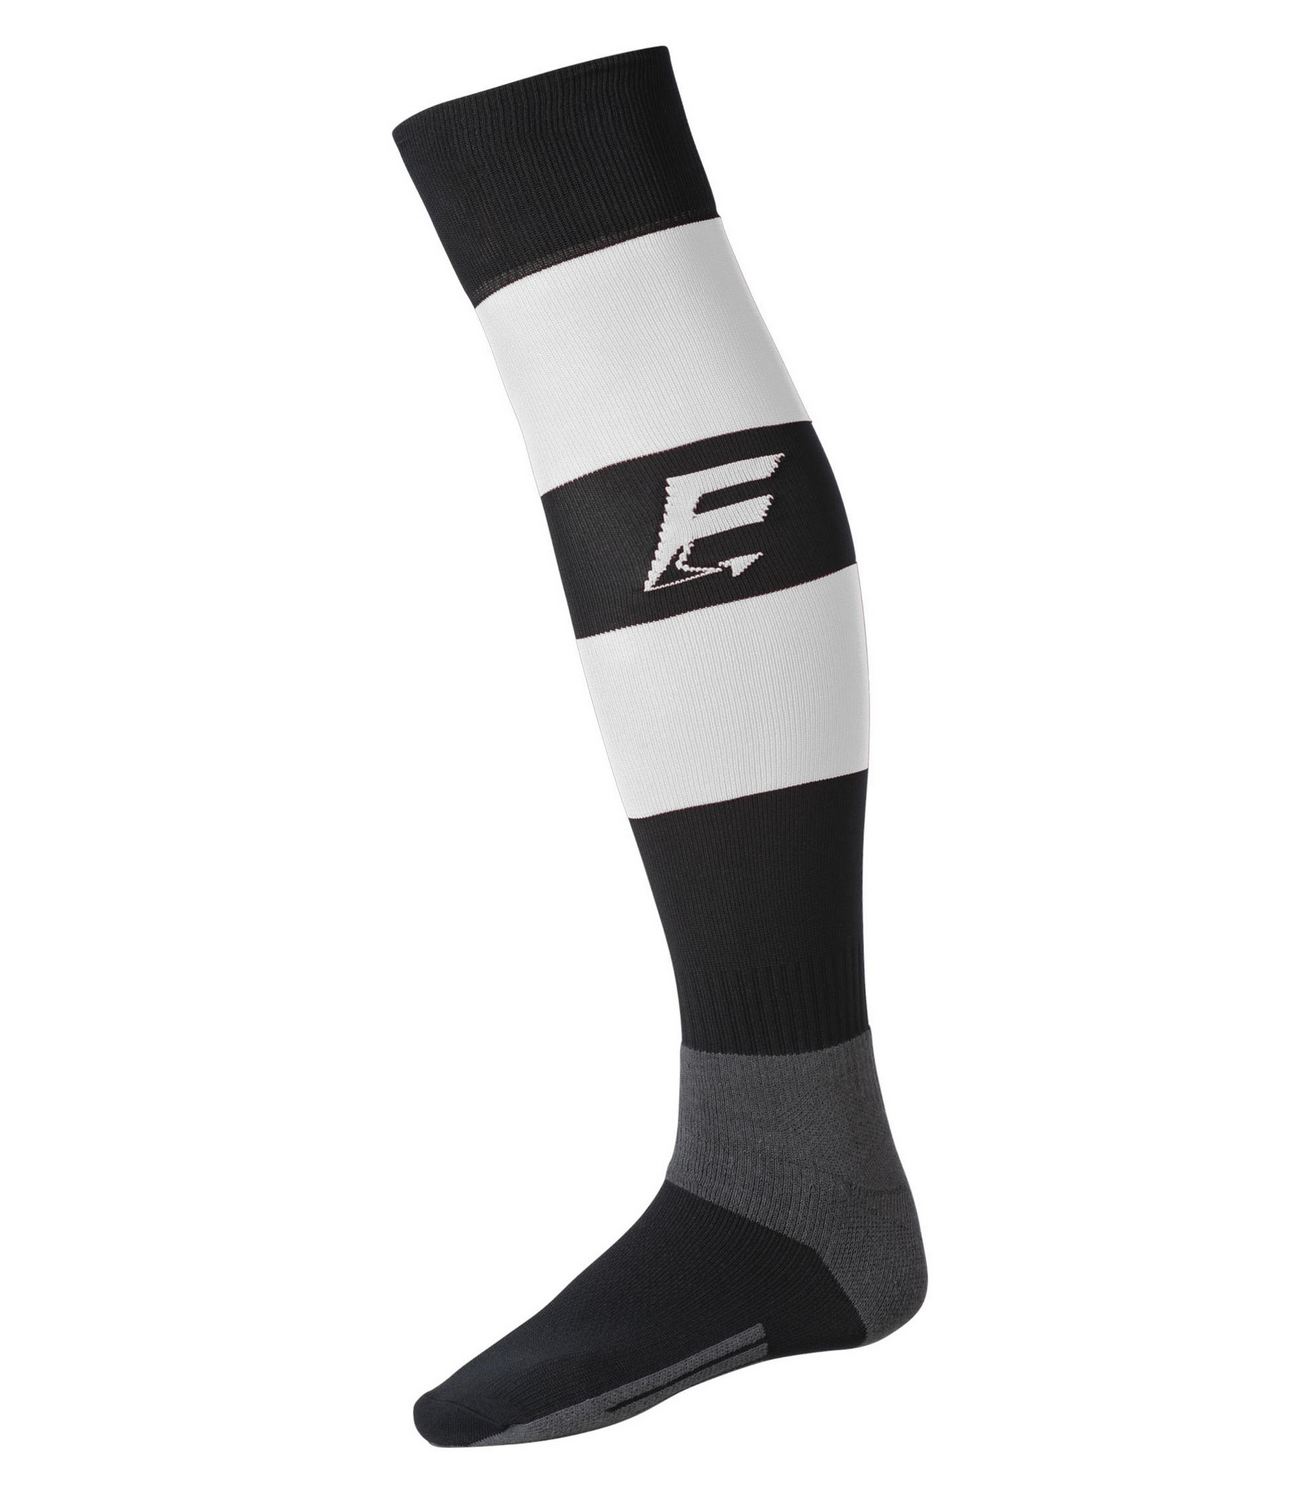 FORCE XV CHAUSSETTES DE RUGBY RAYEES Noir-Blanc